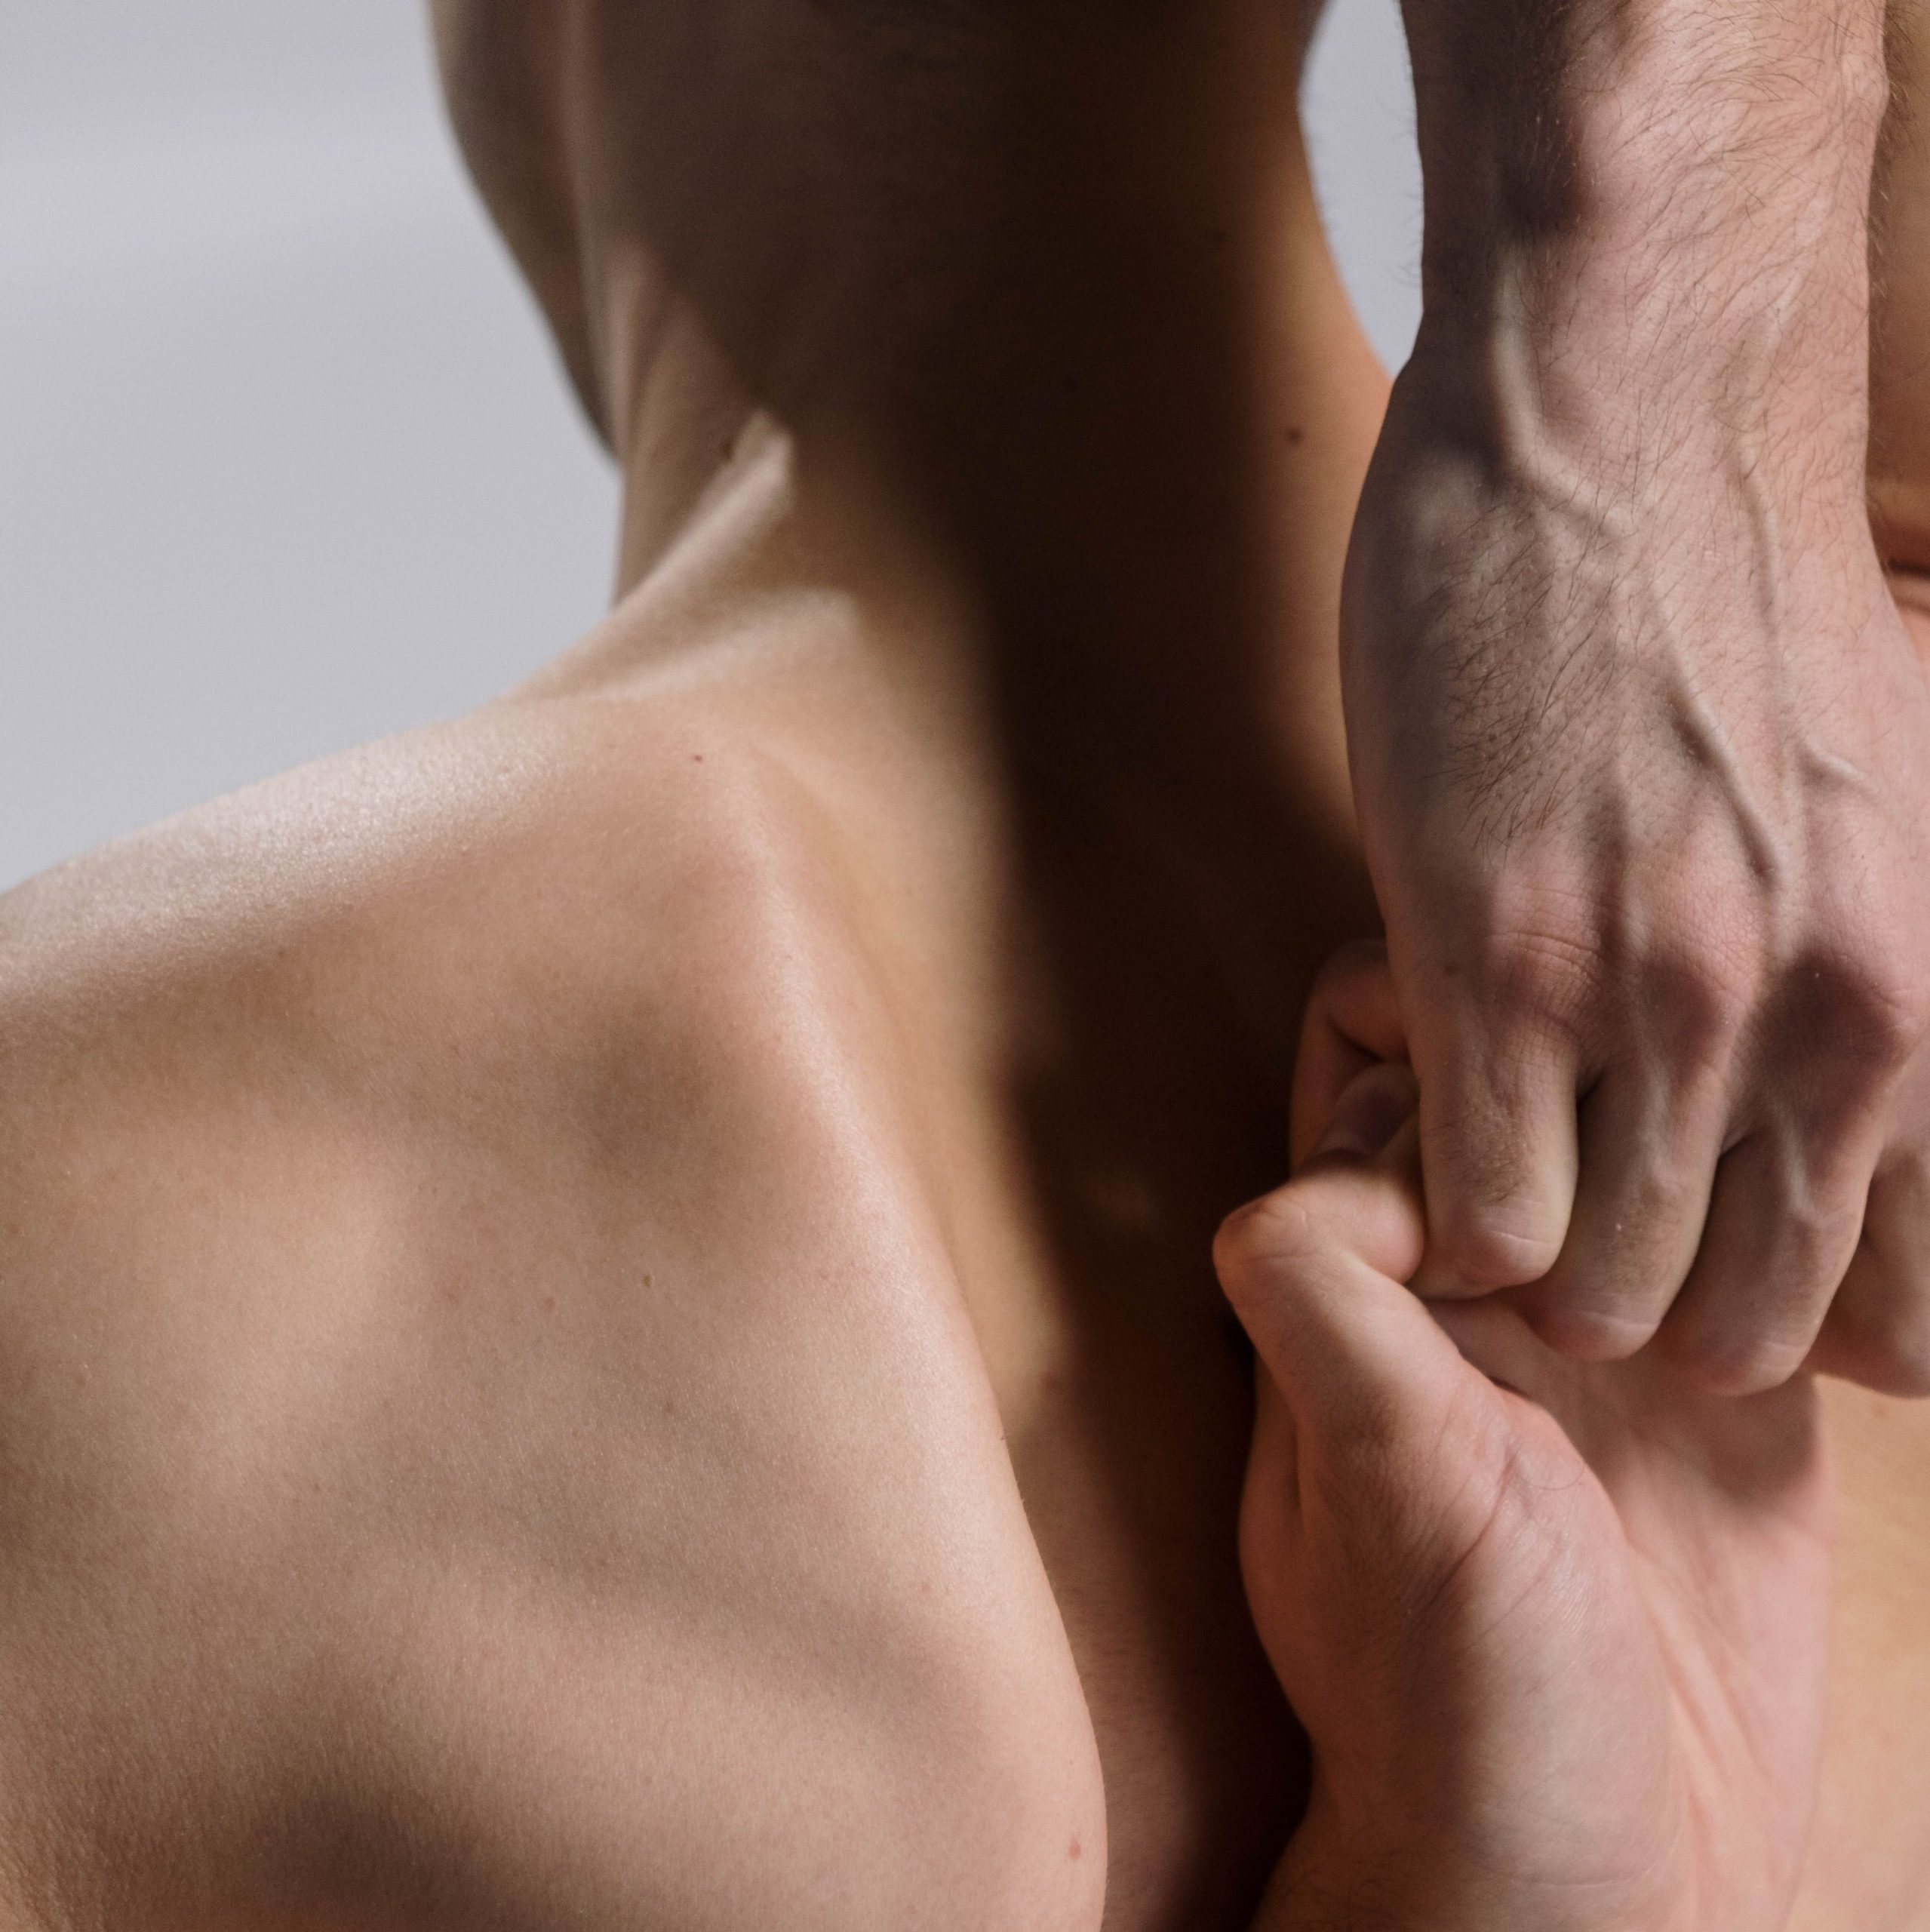 Shirtless man does shoulder stretches with hands linked behind back